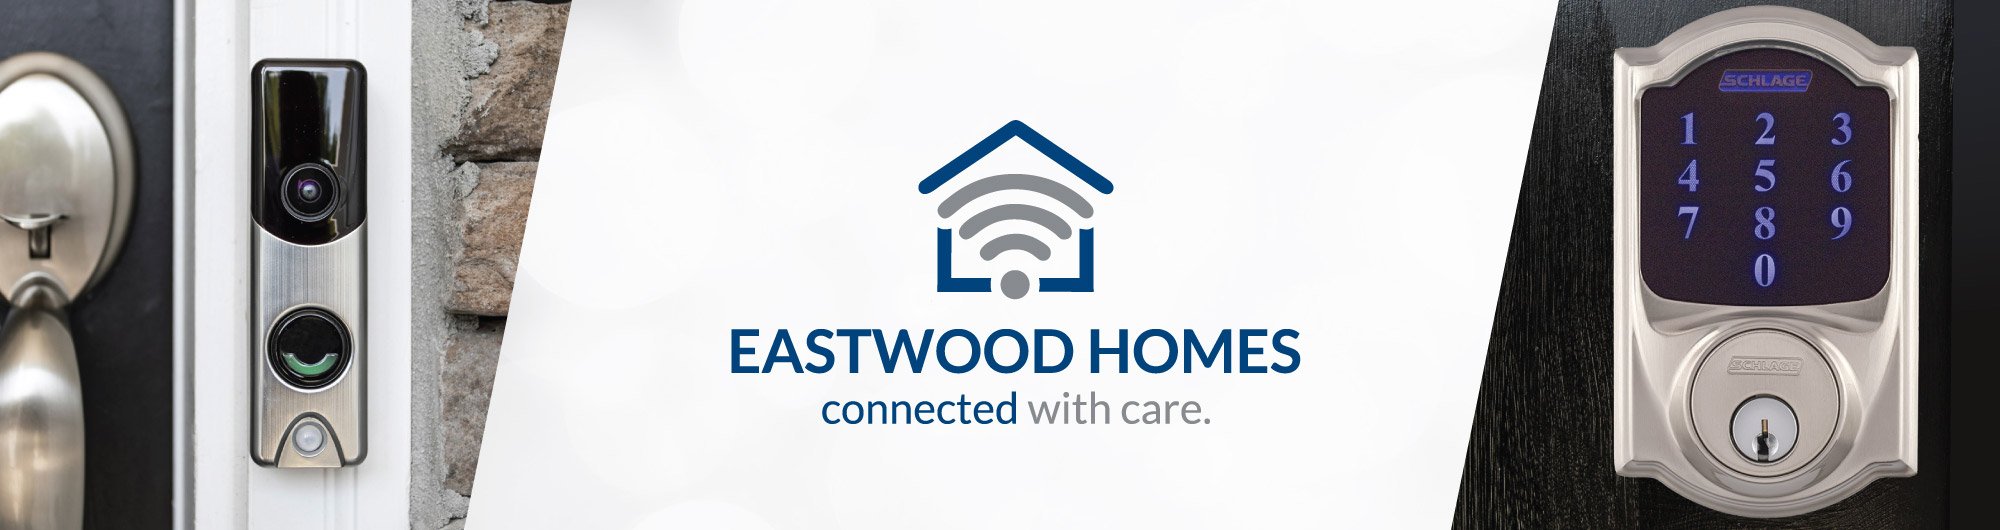 Eastwood Homes Connected with Care